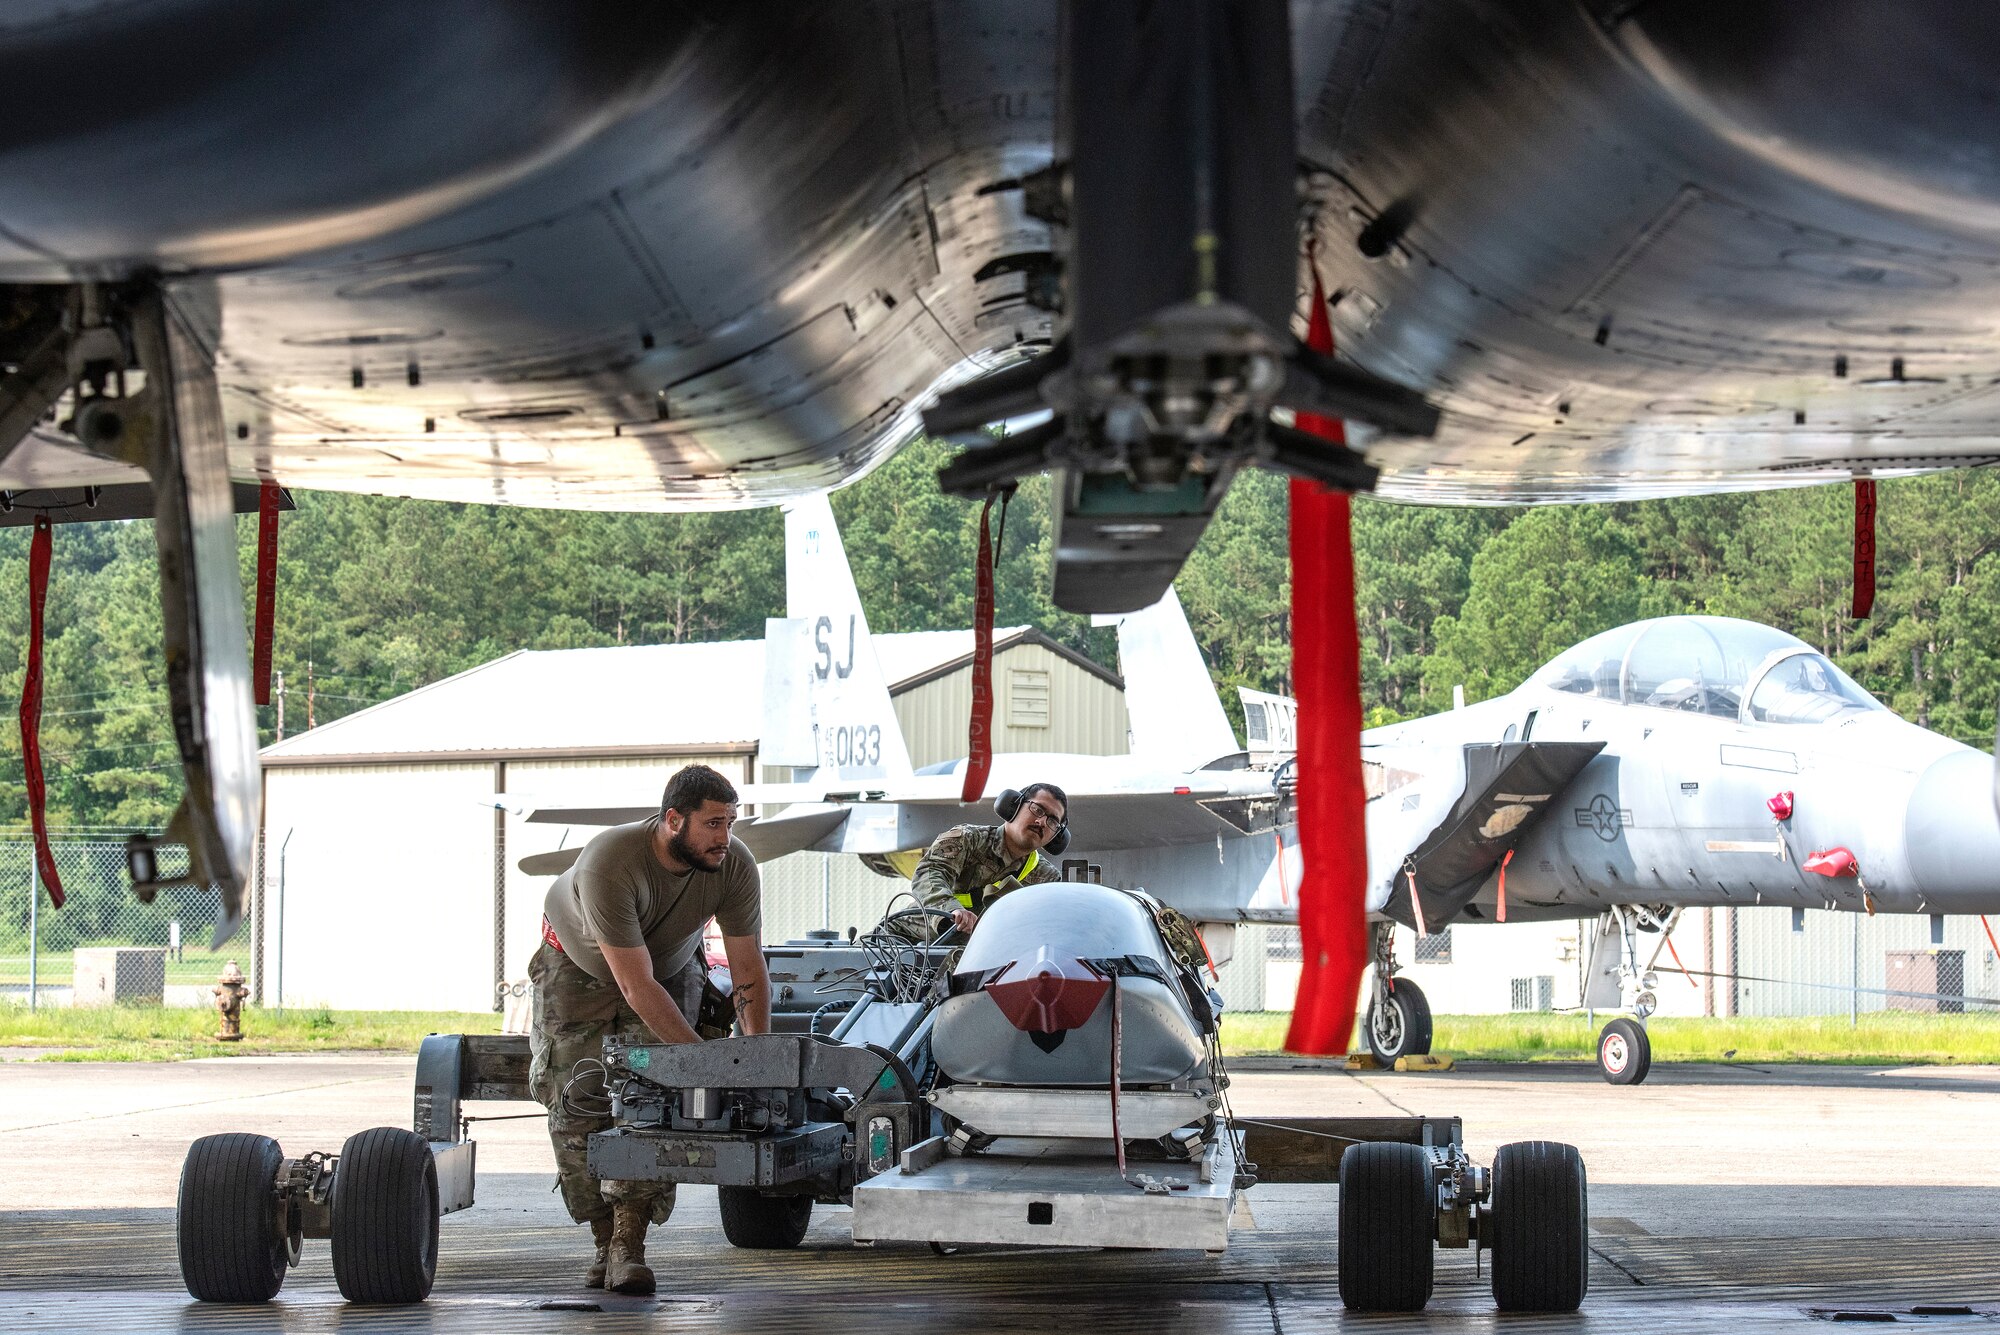 Staff Sgt. Miguel Jiminez Flores, left, 336th Fighter Generation Squadron weapons load crew chief, guides Airman 1st Class Jean Vega-Lopez, 336th FGS weapons load crew member, as he transports an unarmed practice [AGM-158 JASSM] munition toward an F-15E Strike Eagle.